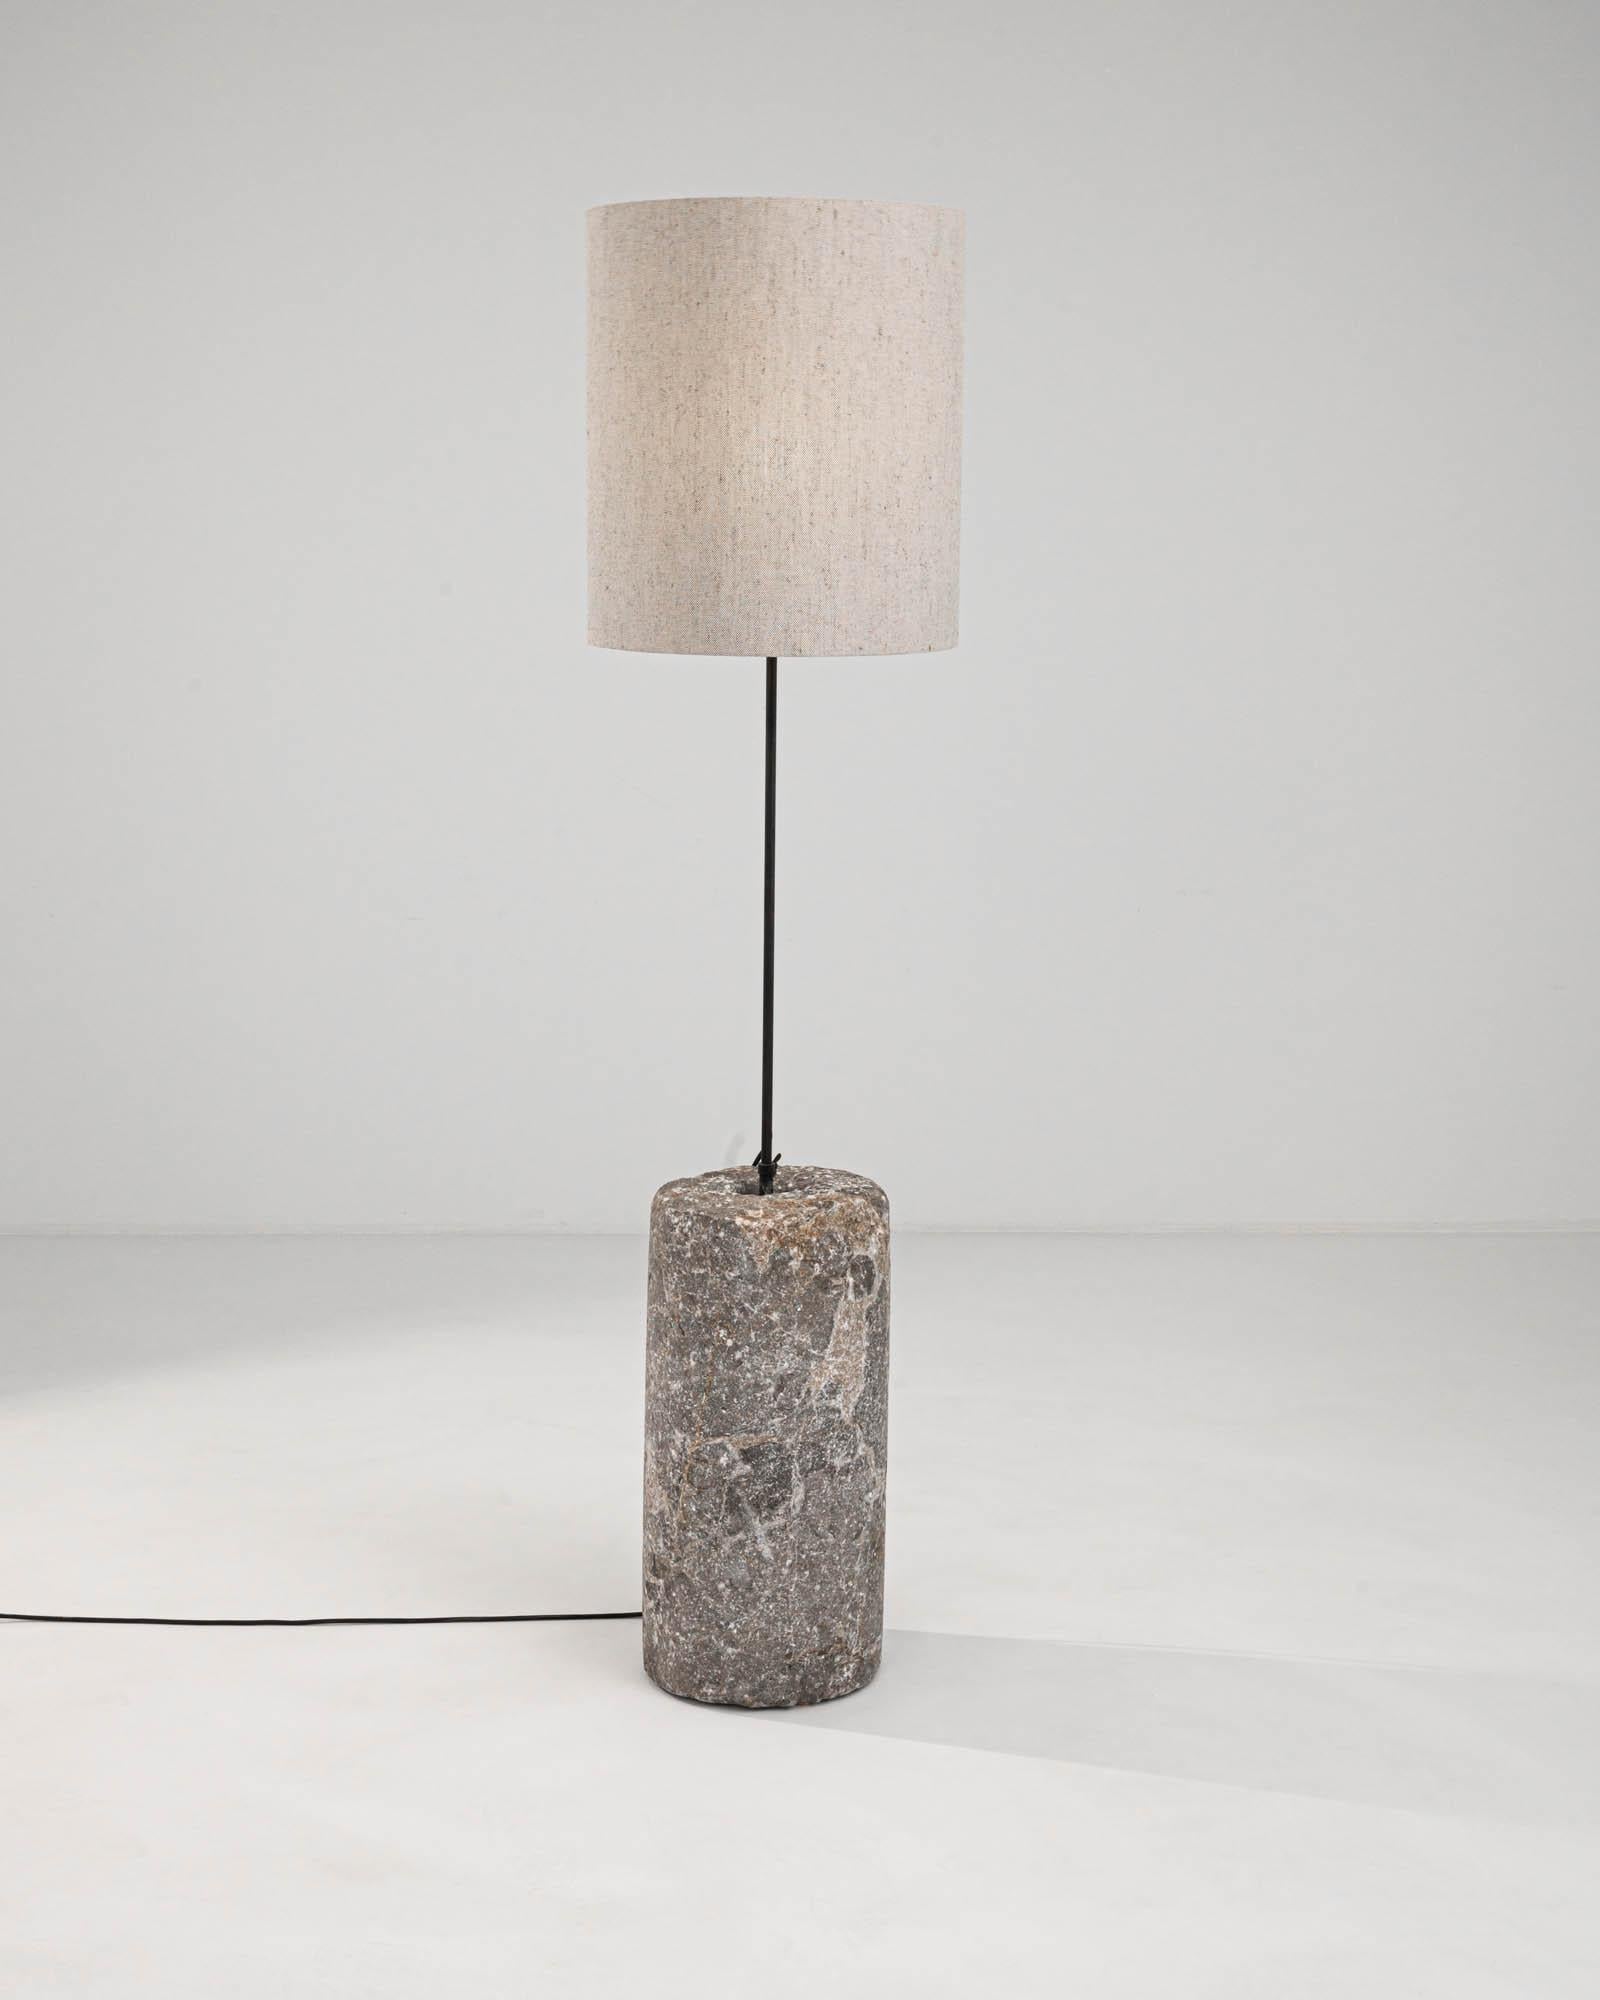 Illuminate your space with the timeless elegance of the 1900s European Marble & Metal Floor Lamp. A celebration of classic style and sophistication, this floor lamp features a genuine marble base, whose unique patterns and warm, earthy tones add an